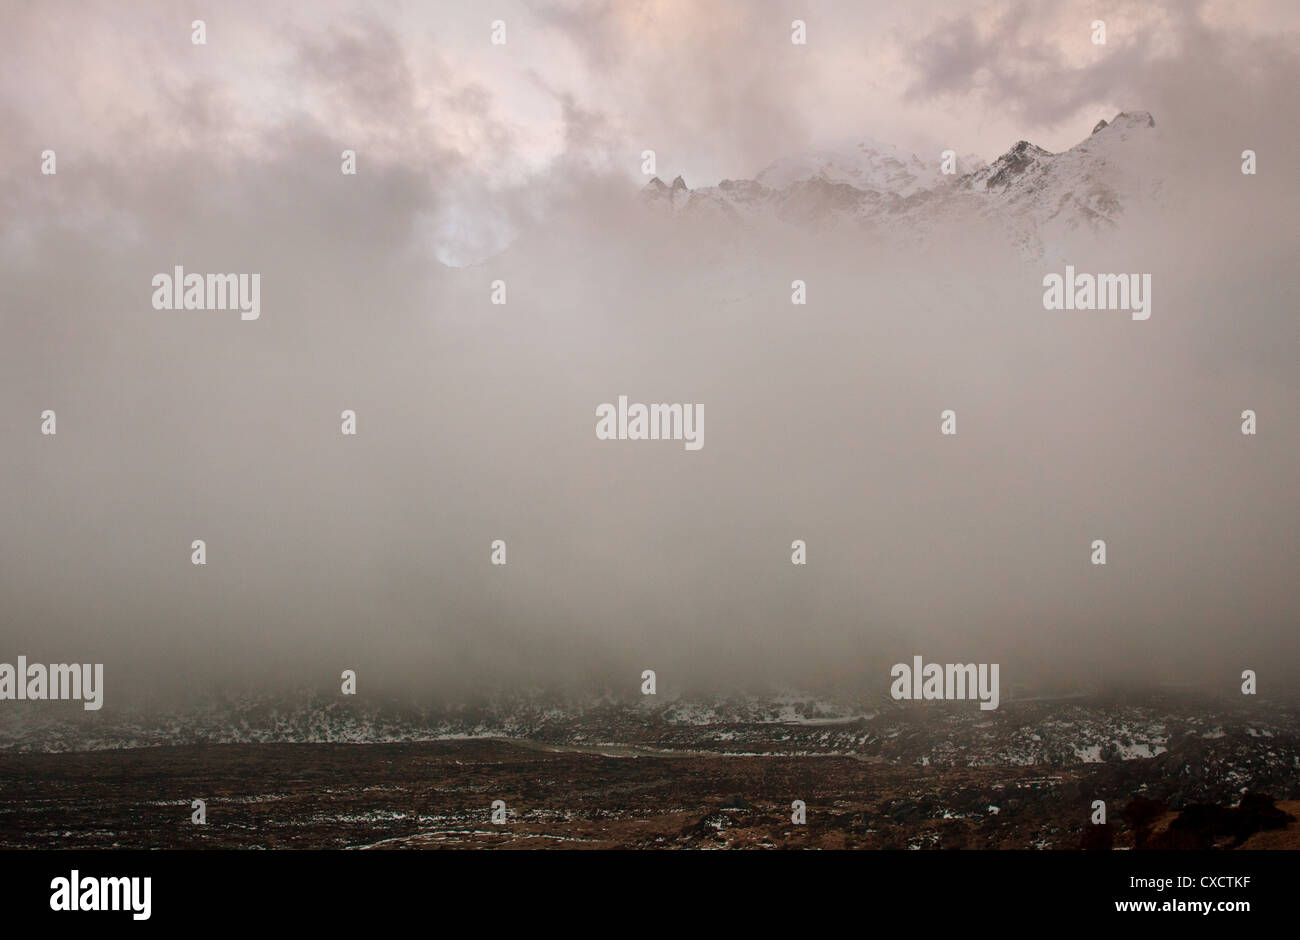 Thick cloud covering mountains along the Langtang valley, Nepal Stock Photo